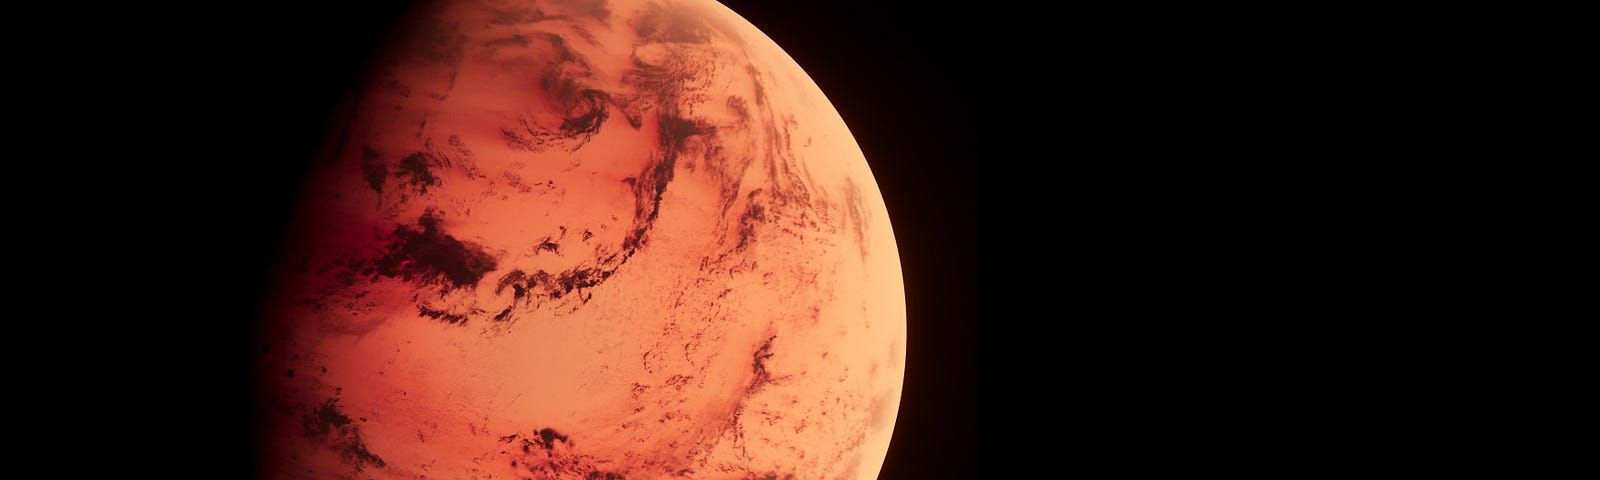 A photo of the planet Mars.